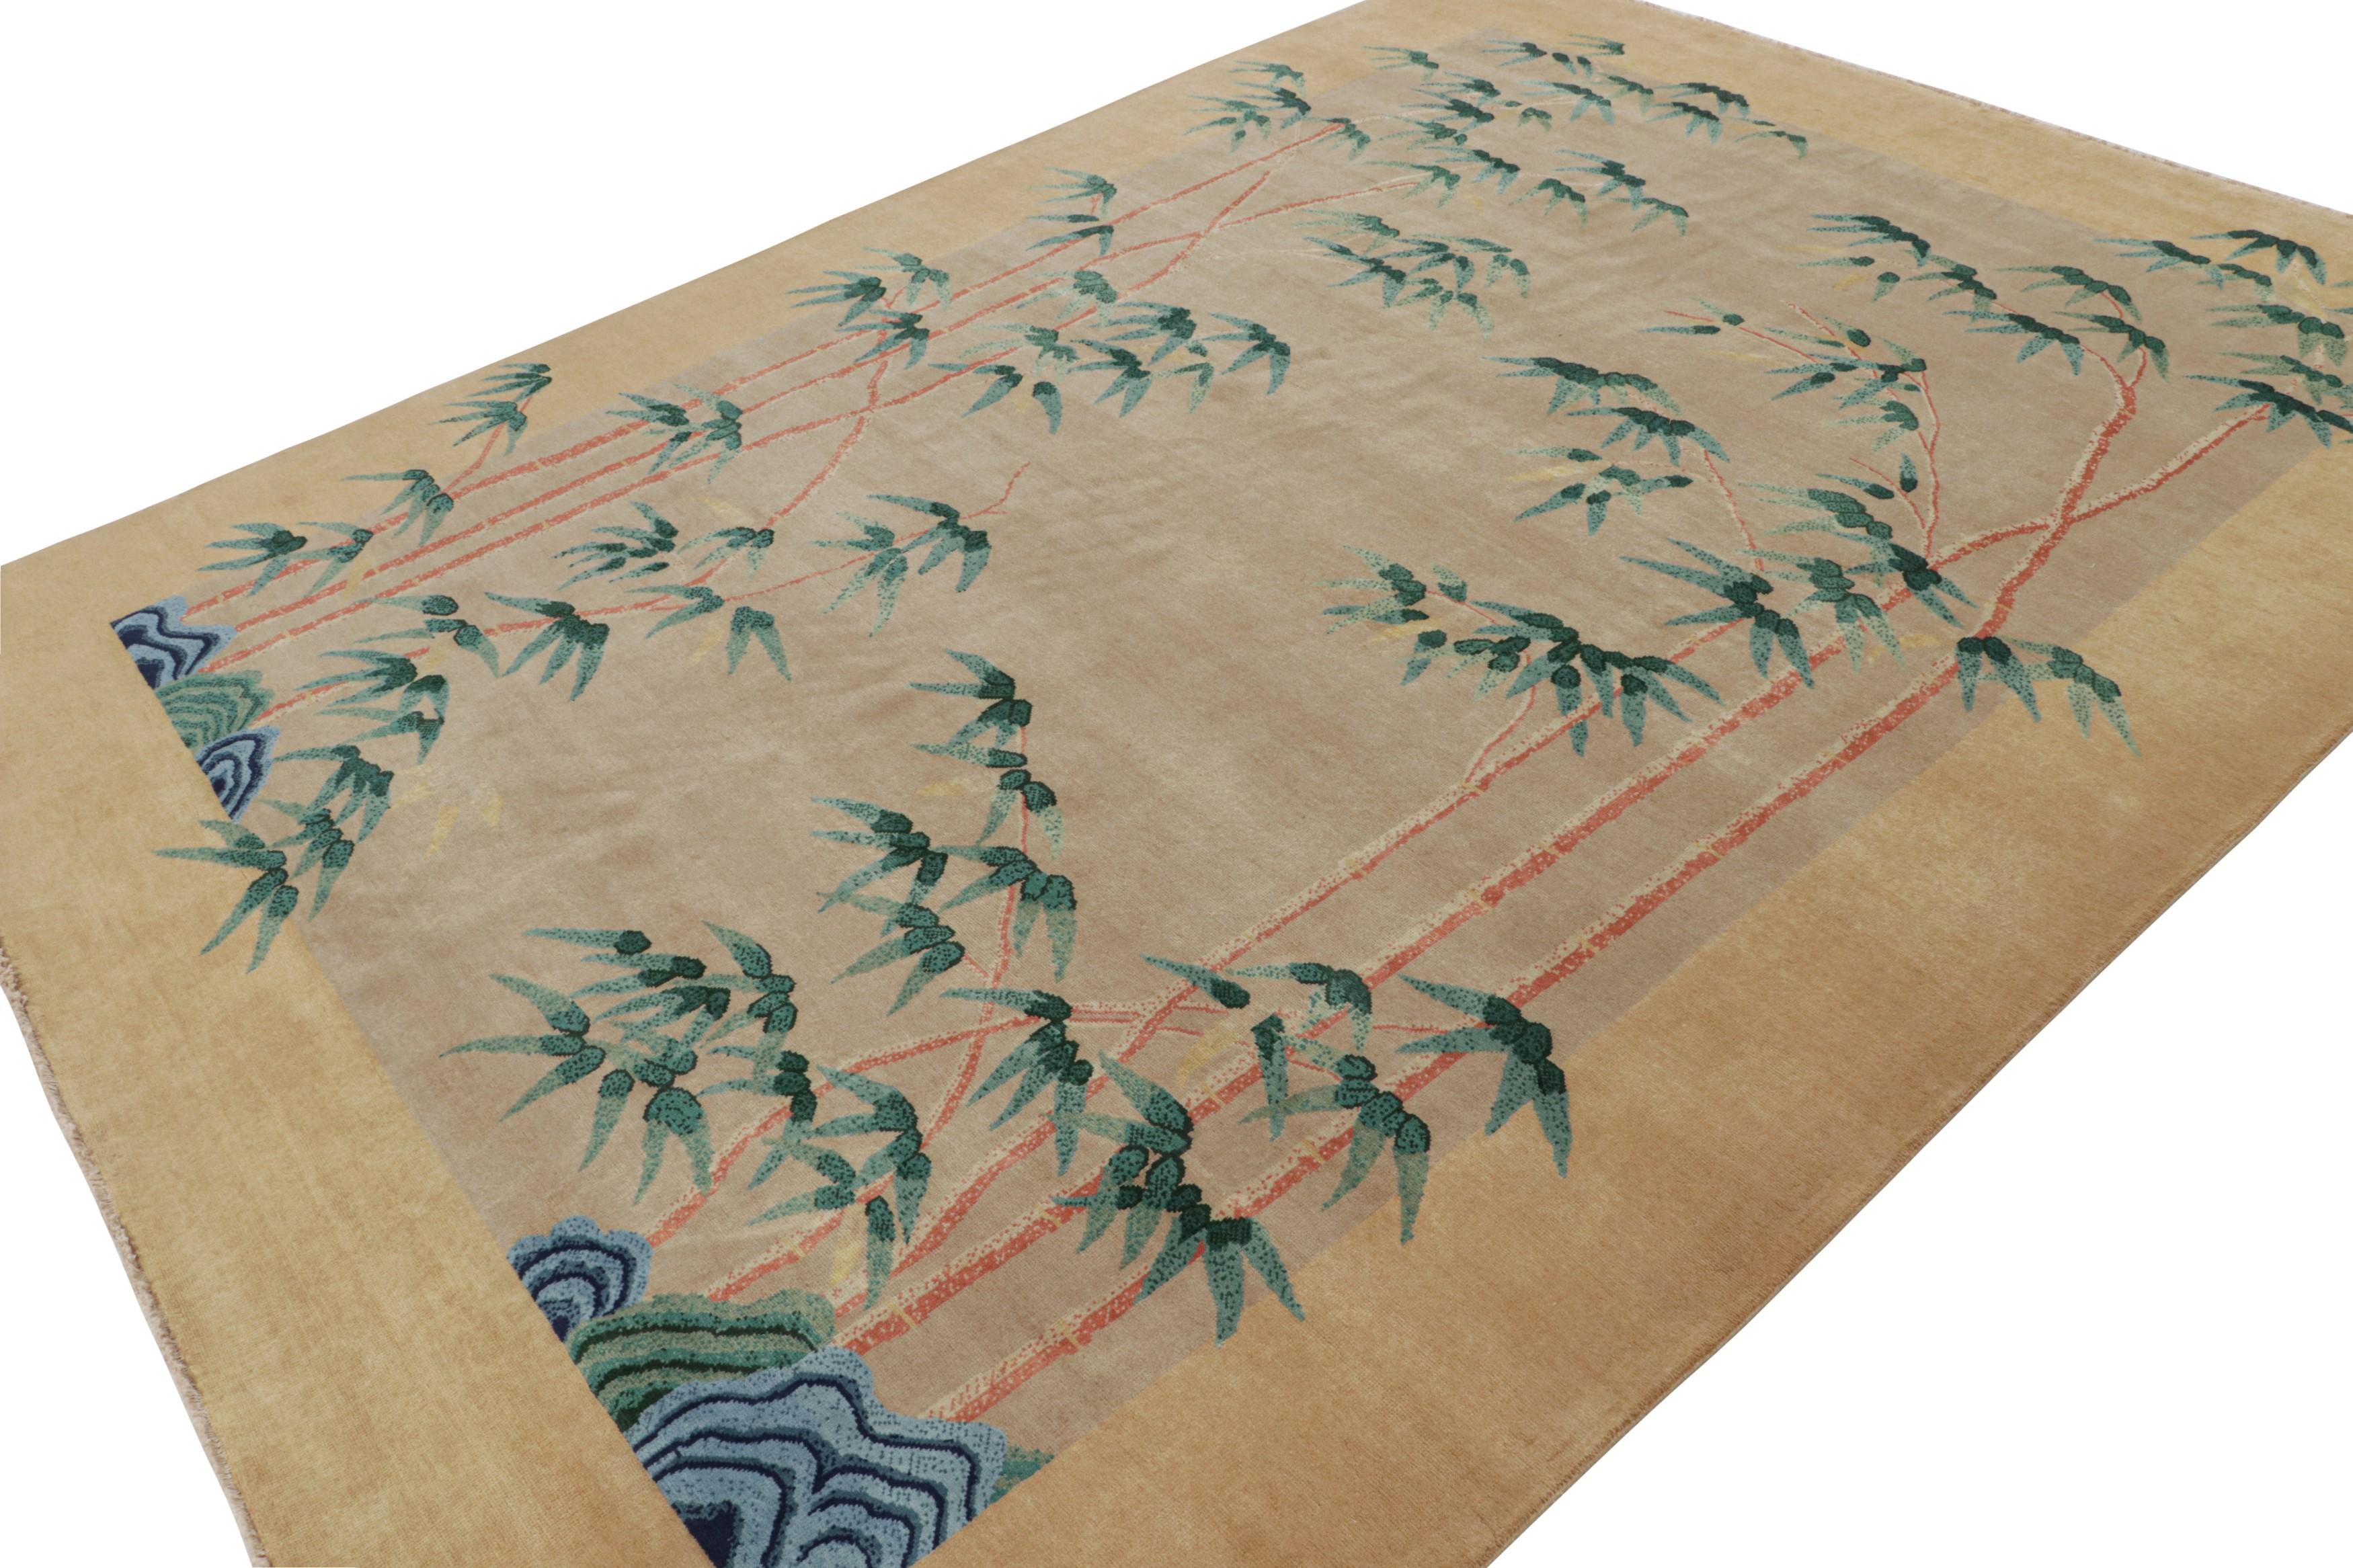 Hand knotted in wool, a 9x12 Chinese art deco style rug inspired by rare period pieces of the 1920s Nichols style. 

On the Design: 

This rug recaptures the Chinese Art Deco rug style of the 1920s. Its floral pattern enjoys a brilliant green, red